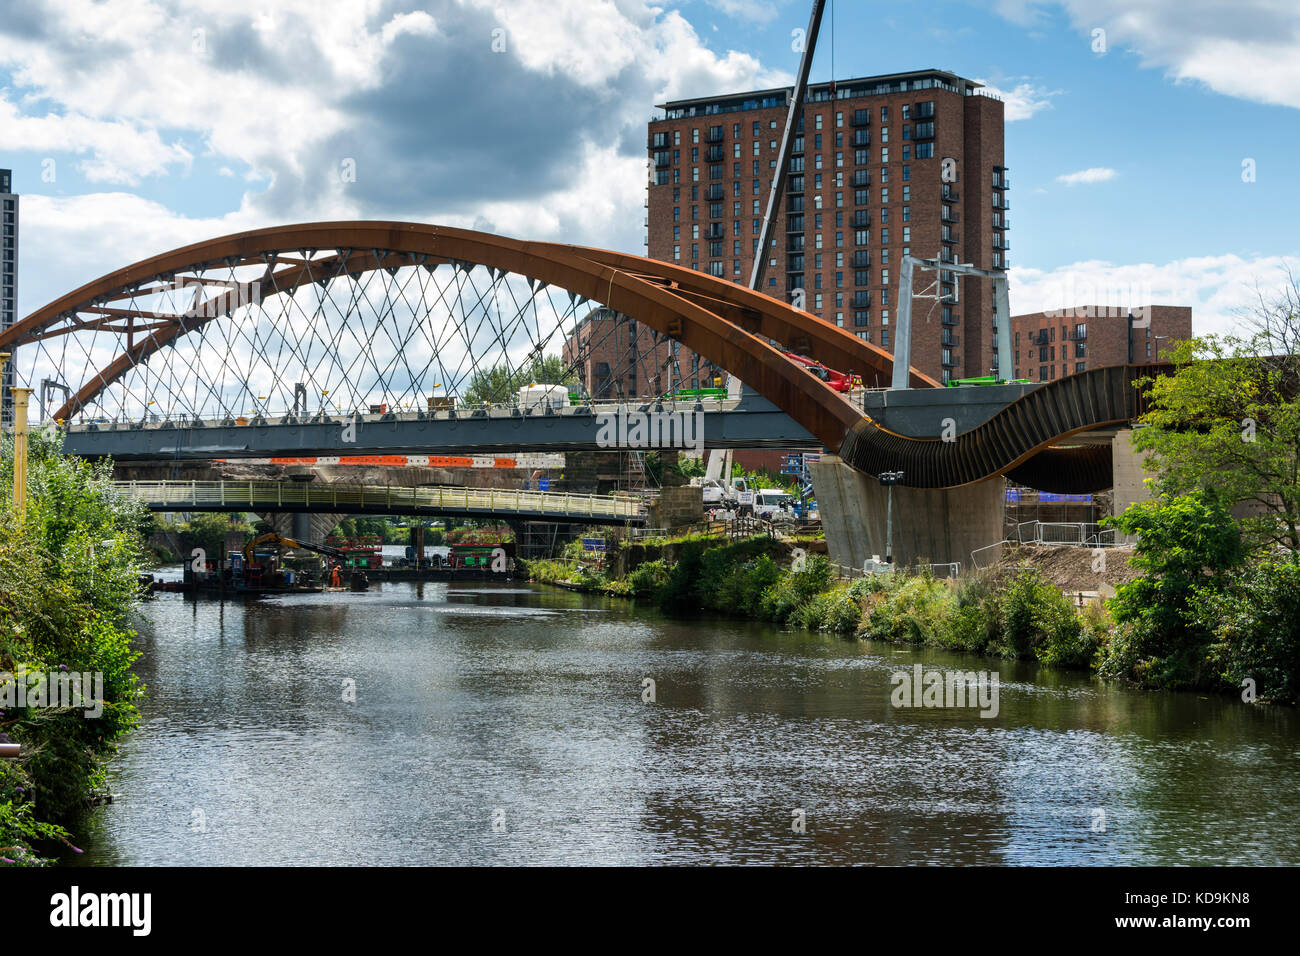 New rail bridge under construction over the river Irwell, for the Ordsall Chord rail link project, Salford, Manchester, England, UK Stock Photo